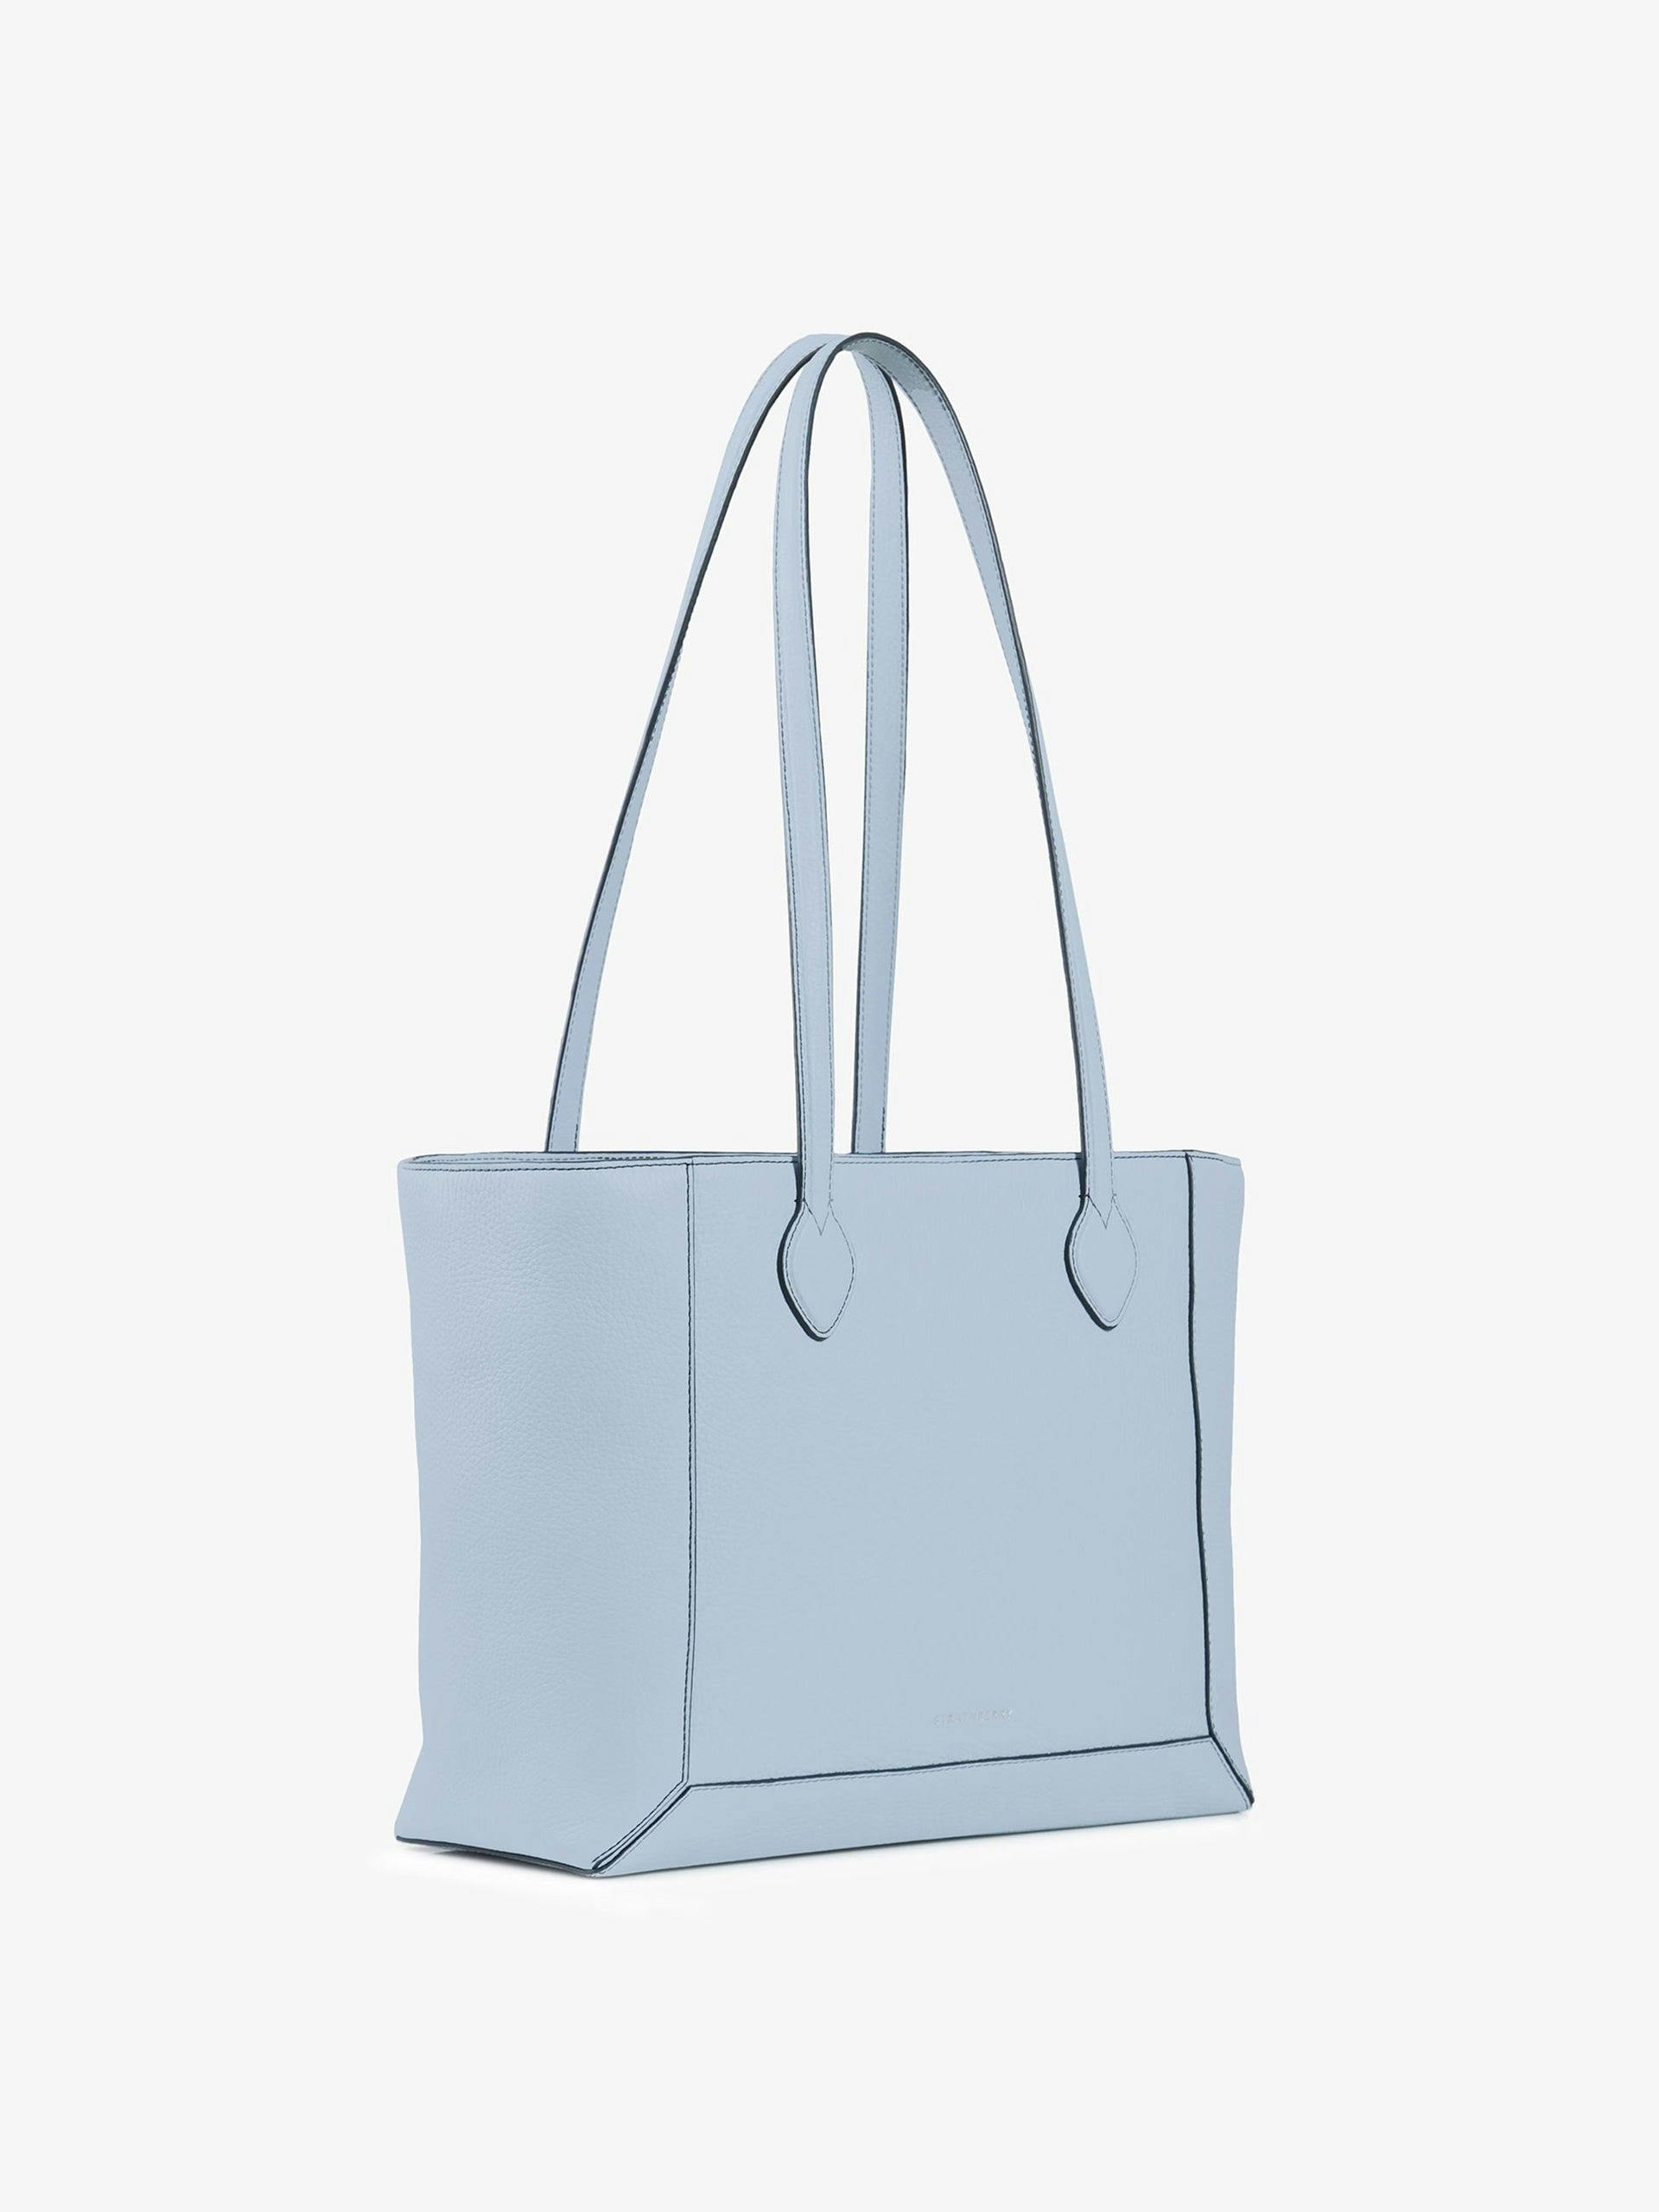 Light blue Mosaic Shopper tote bag with navy stitching